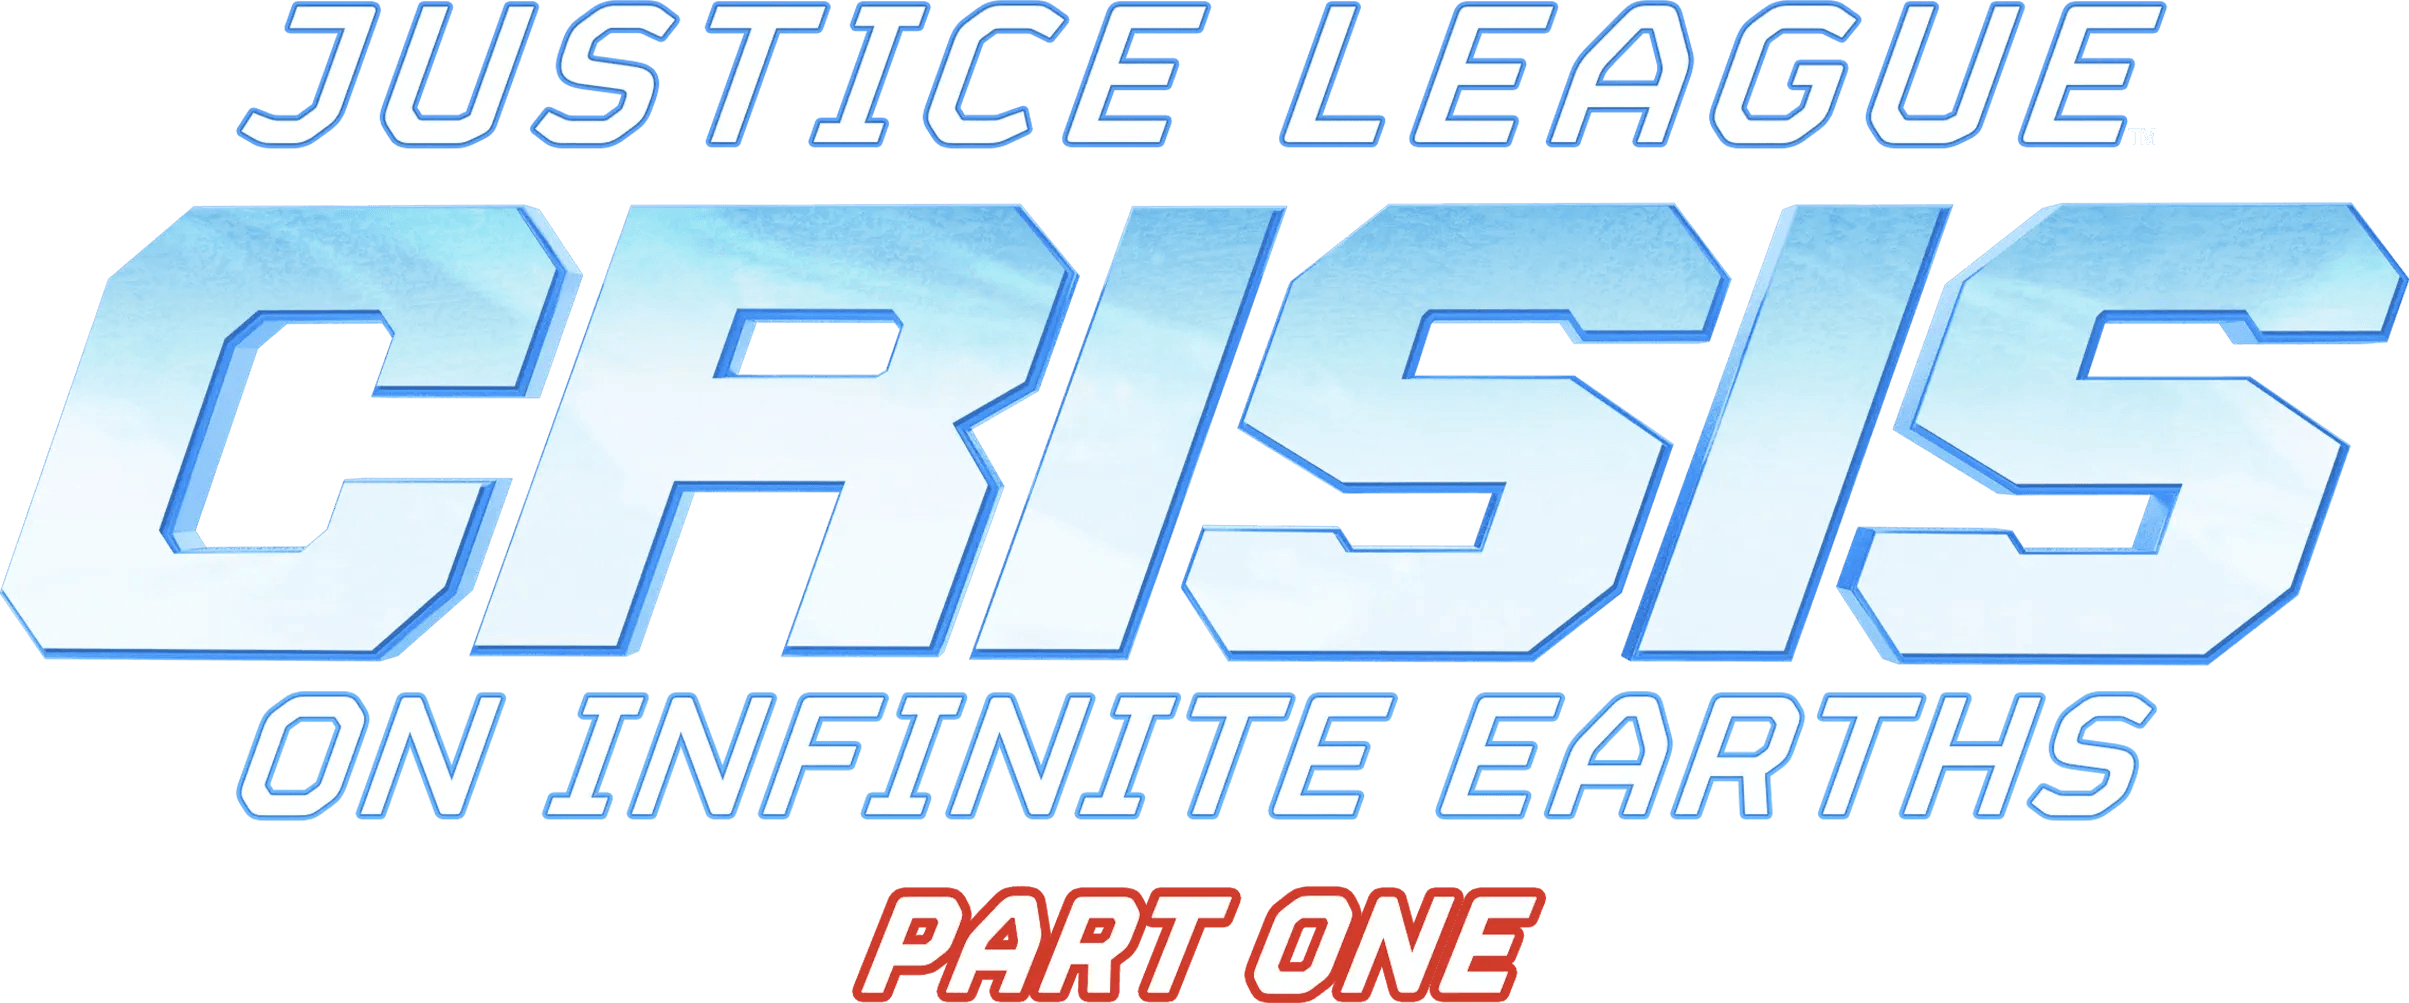 Justice League: Crisis on Infinite Earths Part One logo